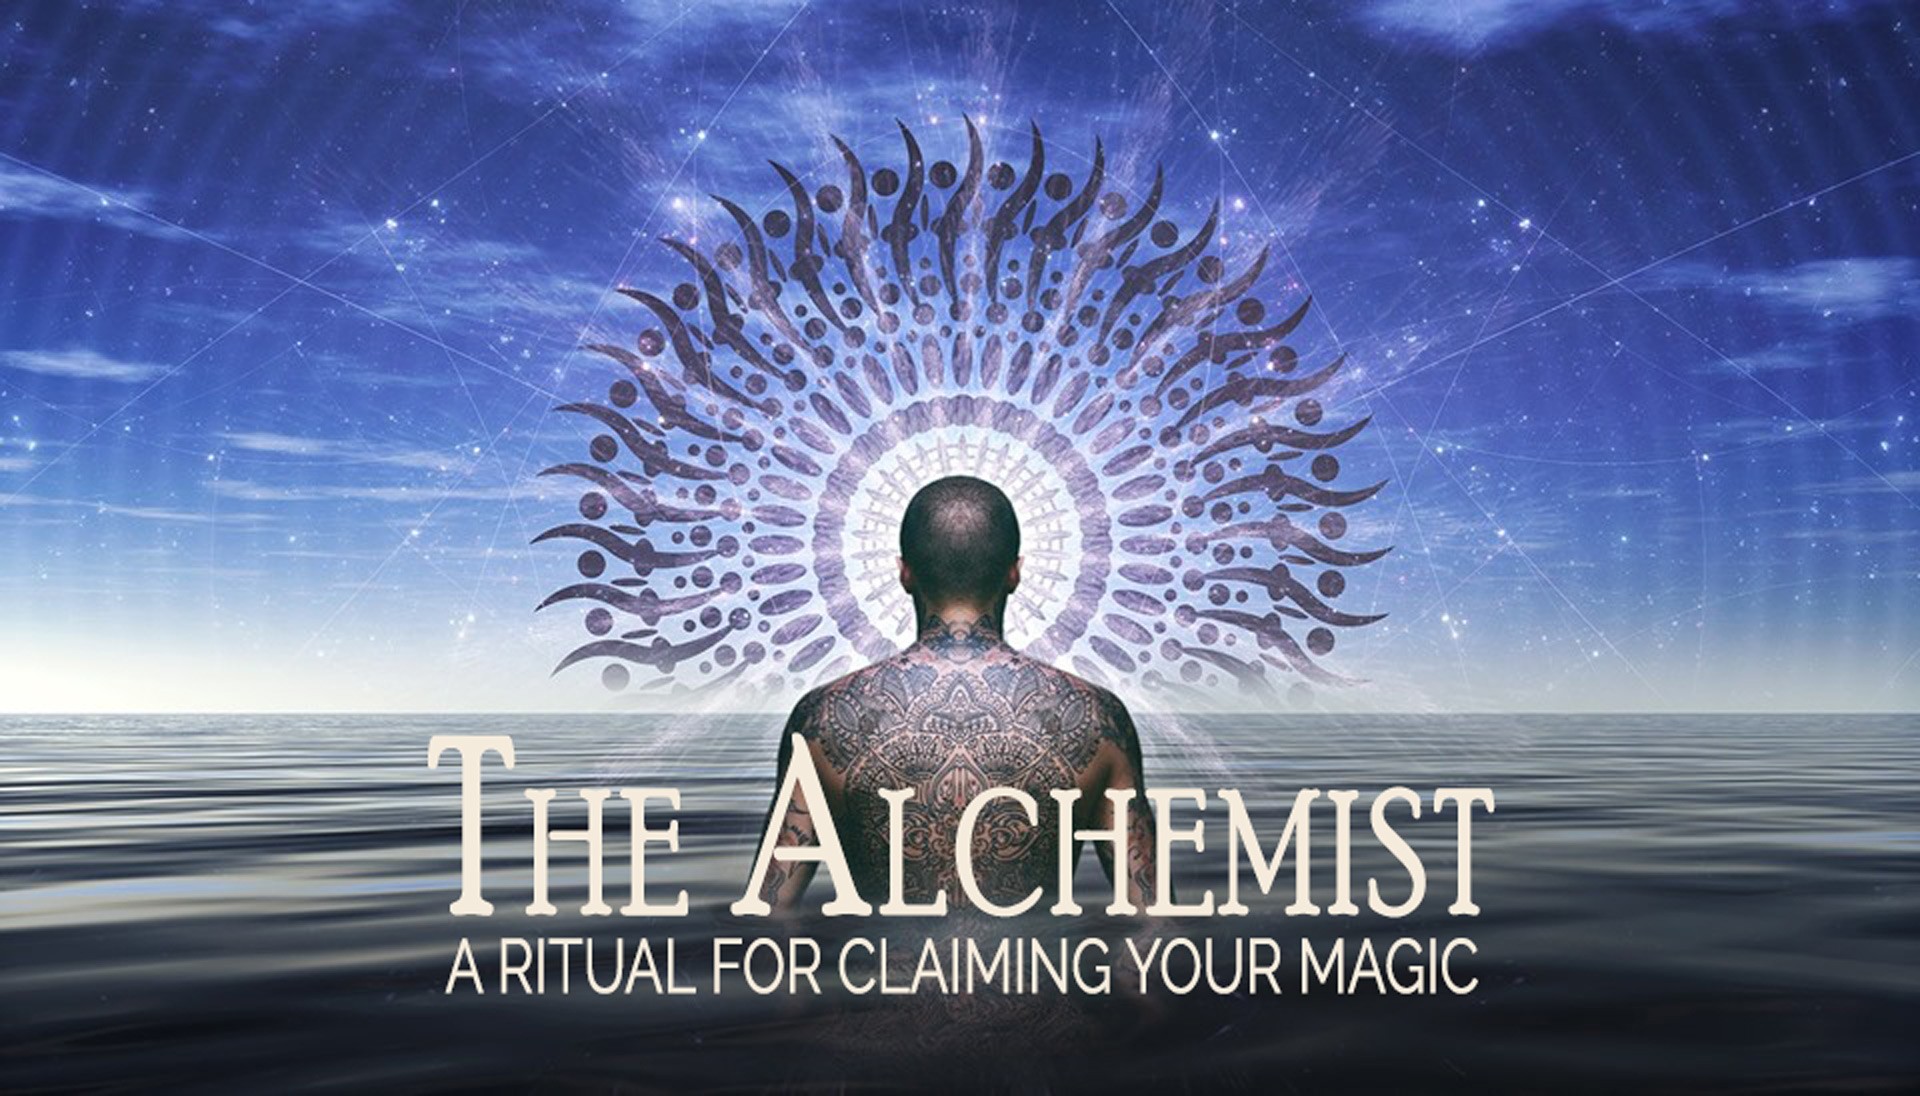 The Alchemist - A Ritual For Claiming Your Magic